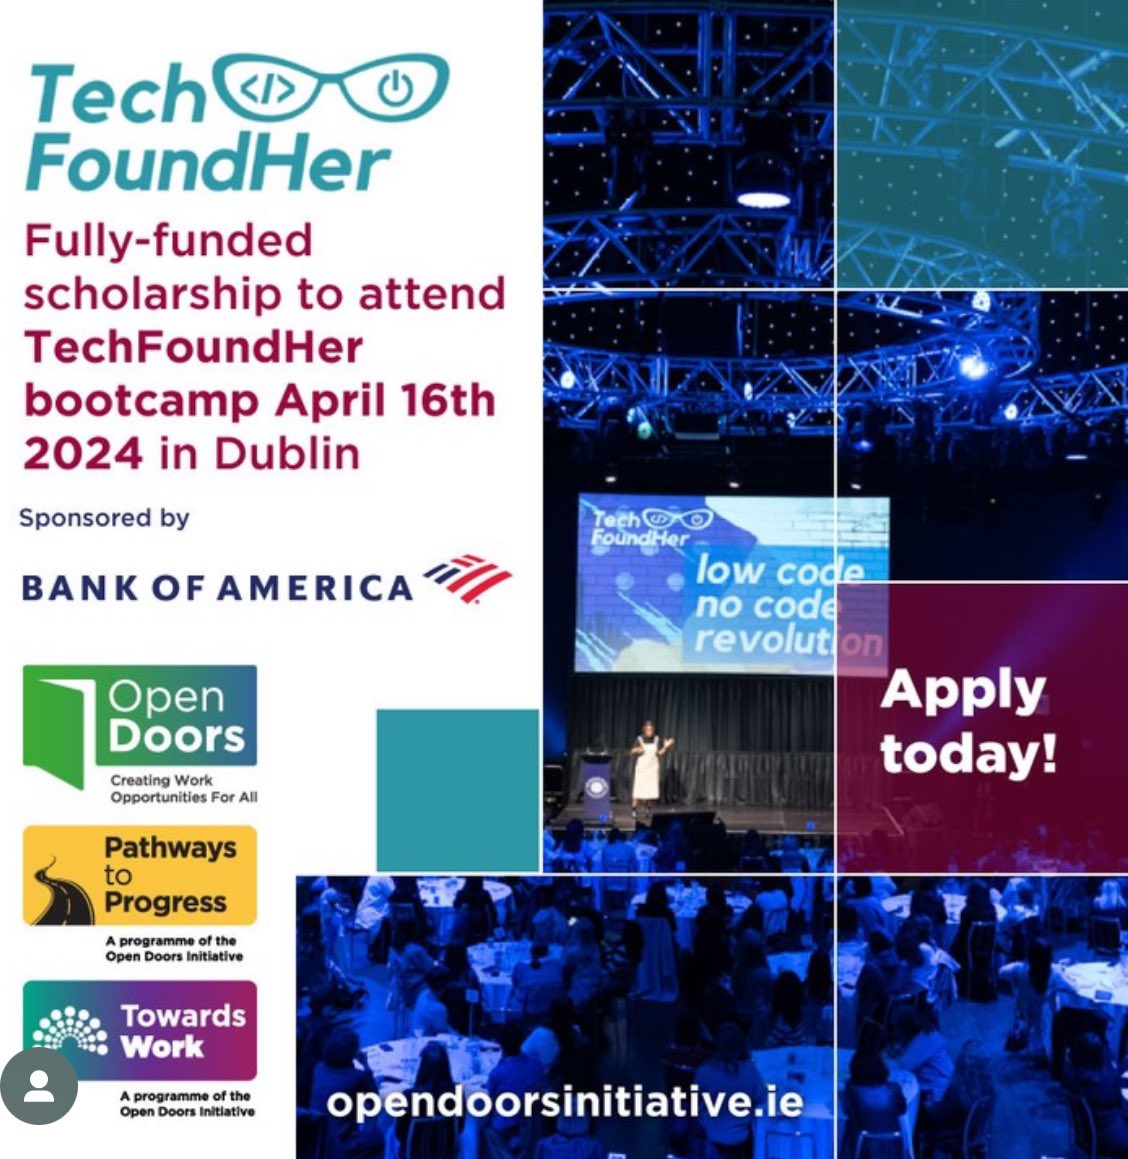 @greendubliner @TechFoundHer @OpenDoorsToWork Help spread the word!! Link to @OpenDoorsToWork scholarship application form forms.office.com/pages/response… - apply today @TechFoundHer Bootcamp FYI @dccahalane @DubCityCouncil @DCCEconDev @UkraineIreland @miadunphy @AineKerr @Dr_Niamh_Shaw @Rethink_Ireland @SEIreland @TheDigitalHub